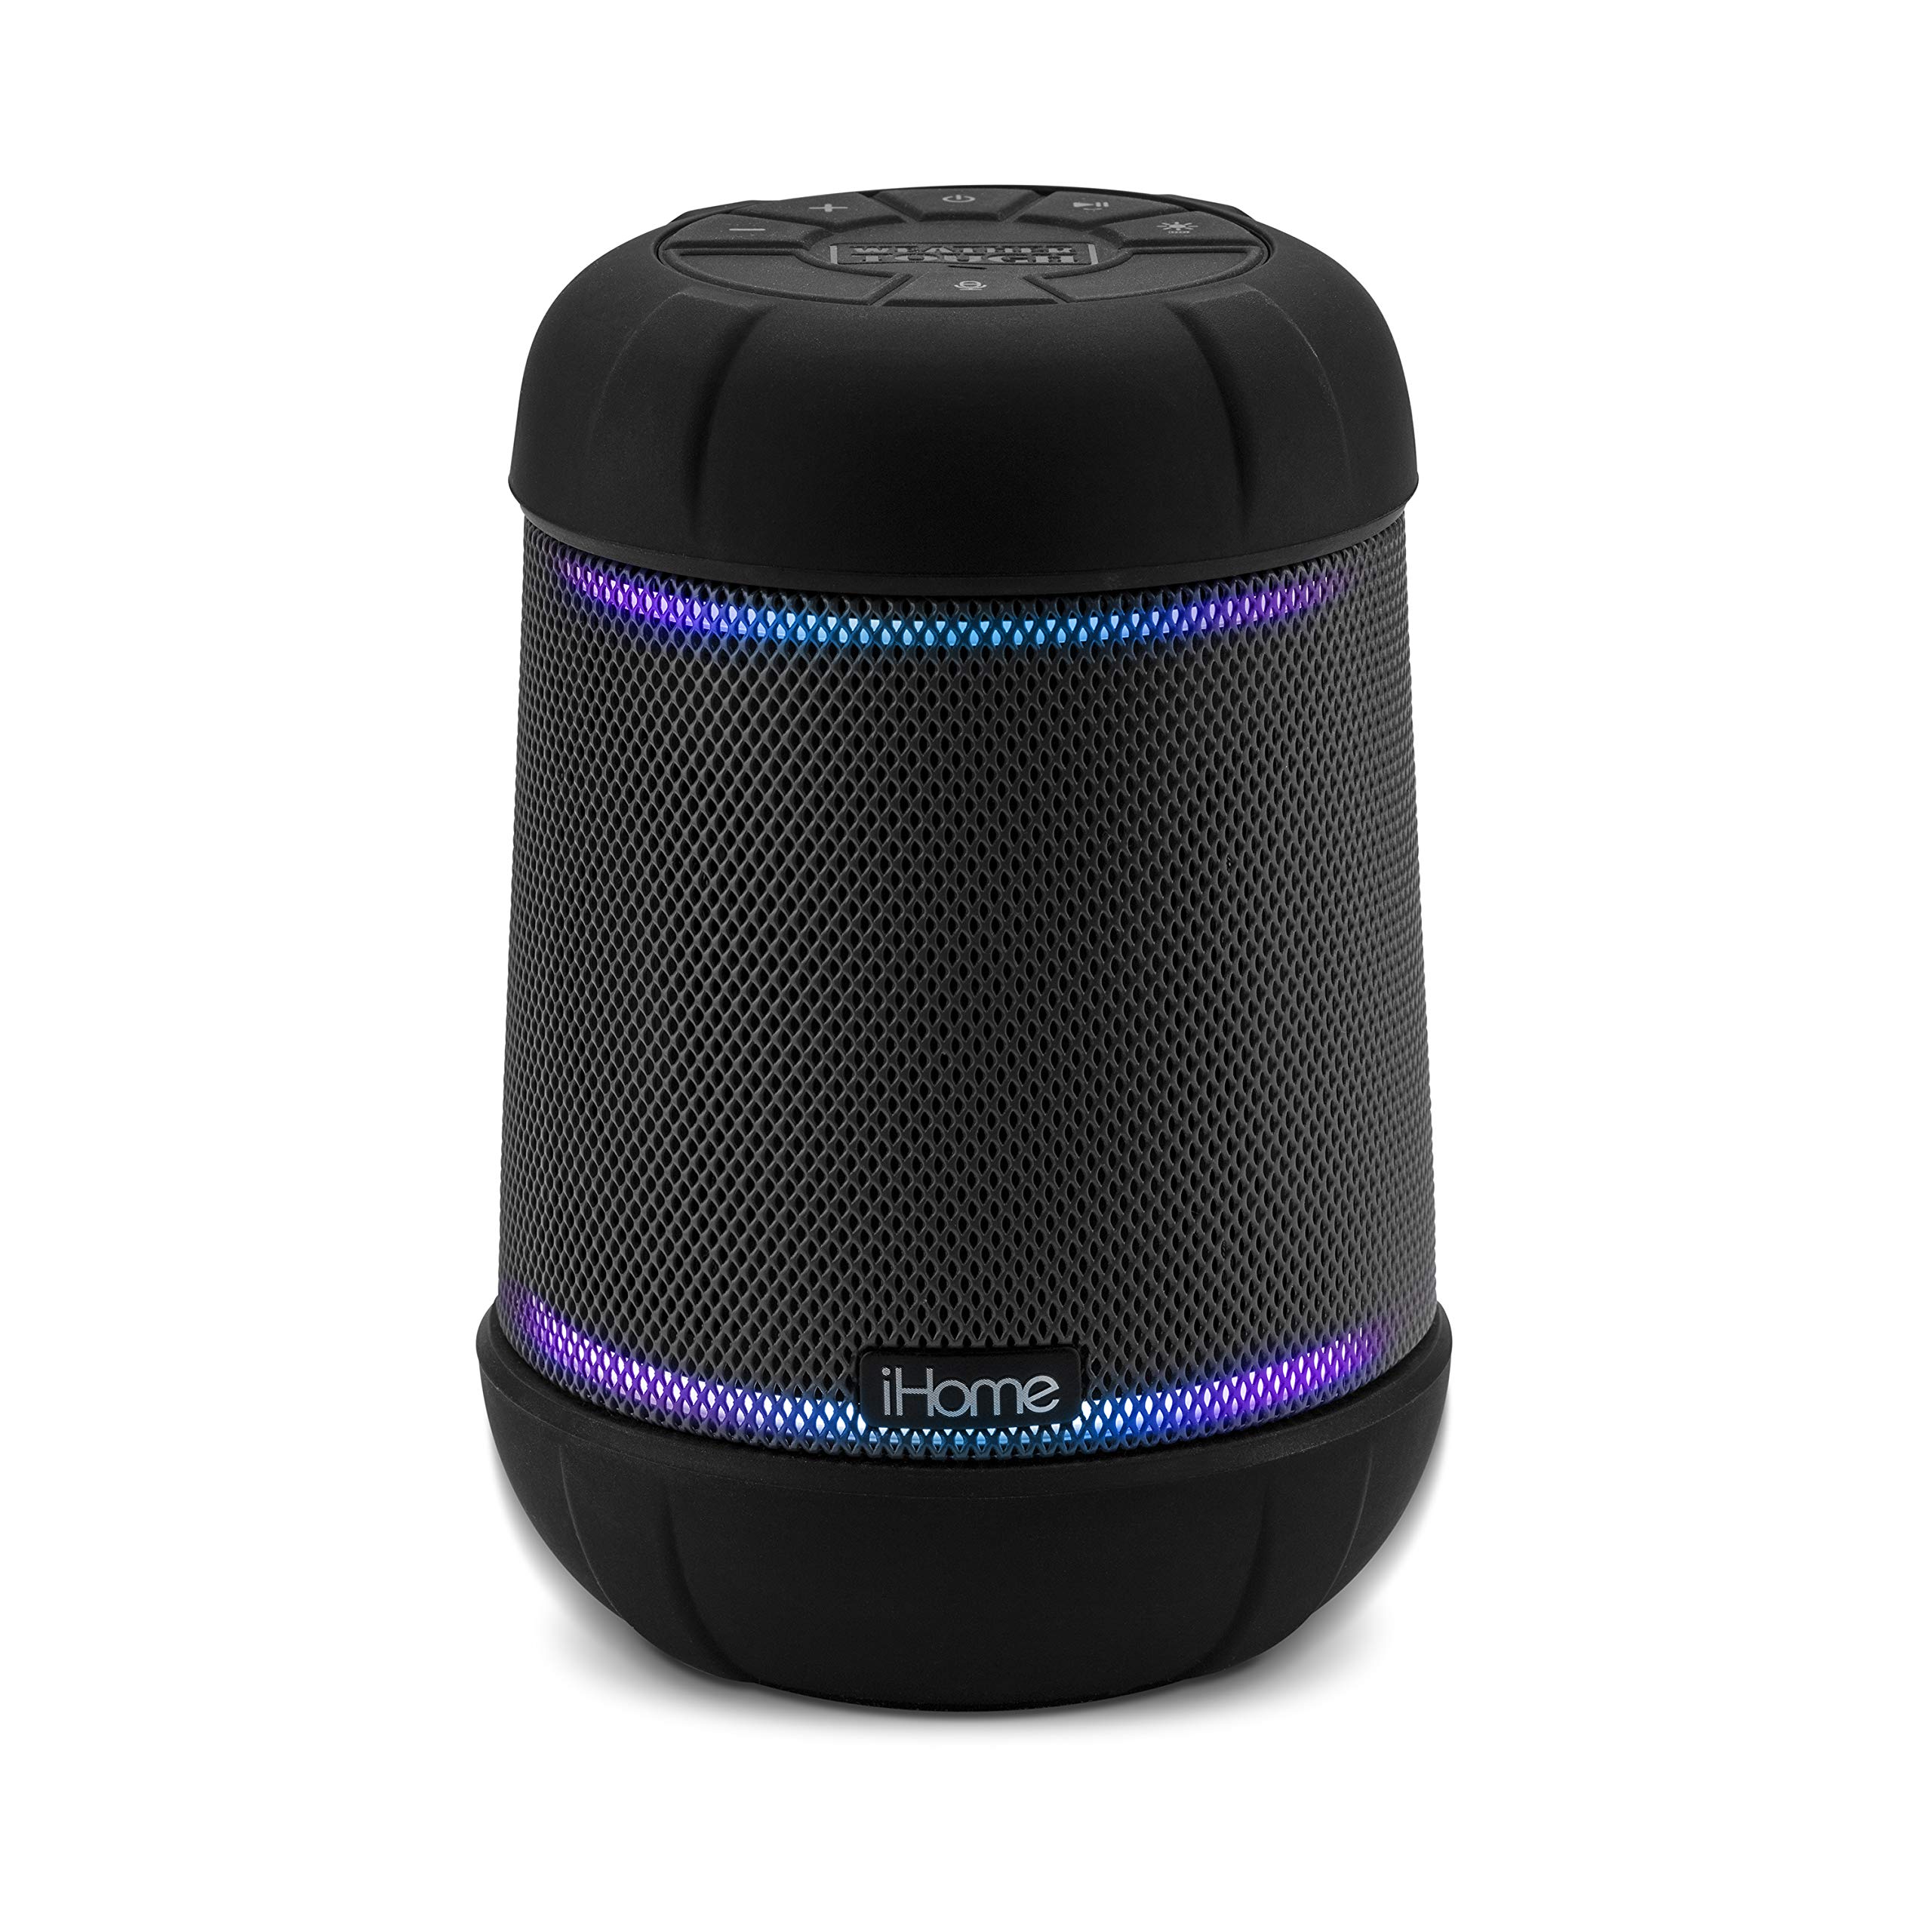 iHome iBT158 Smart Bluetooth Speaker - With Alexa Built-In and Color Changing LED Lights - Perfect Portable Audio Device for